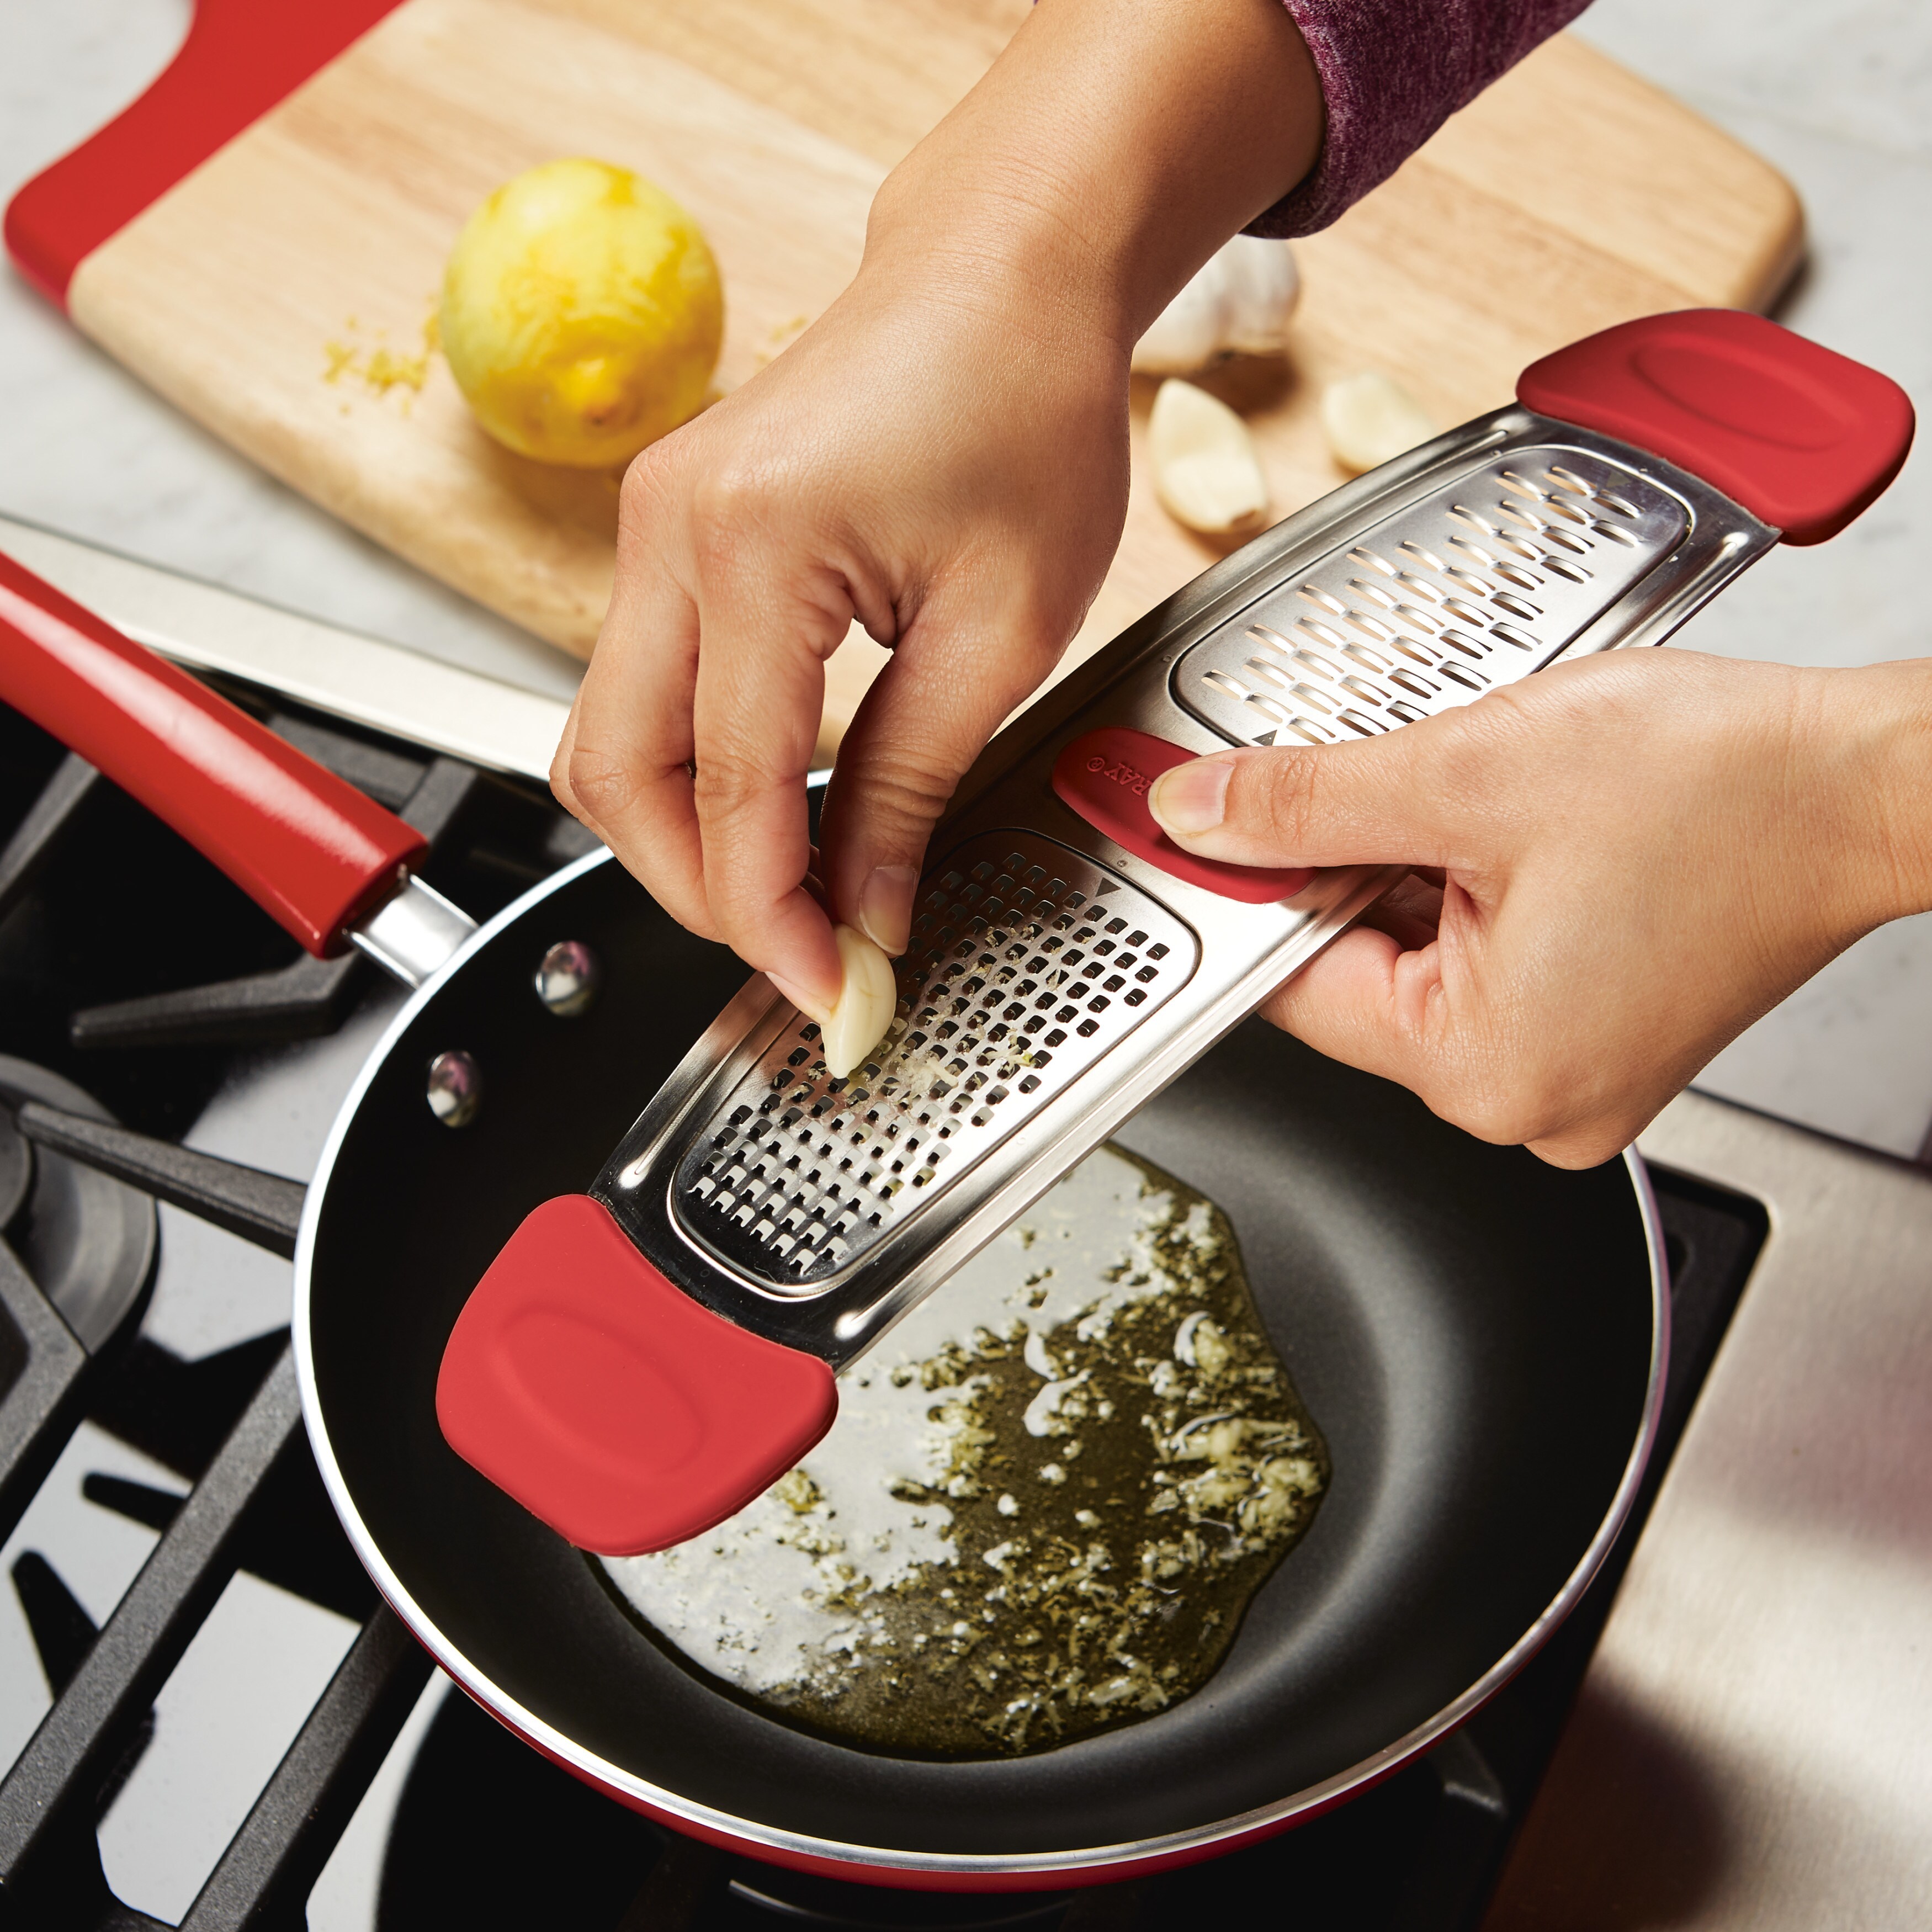 https://ak1.ostkcdn.com/images/products/17666476/Rachael-Ray-Stainless-Steel-Multi-Grater-with-Silicone-Handles-52647a74-fa3b-4f19-b558-7990e1f5f219.jpg